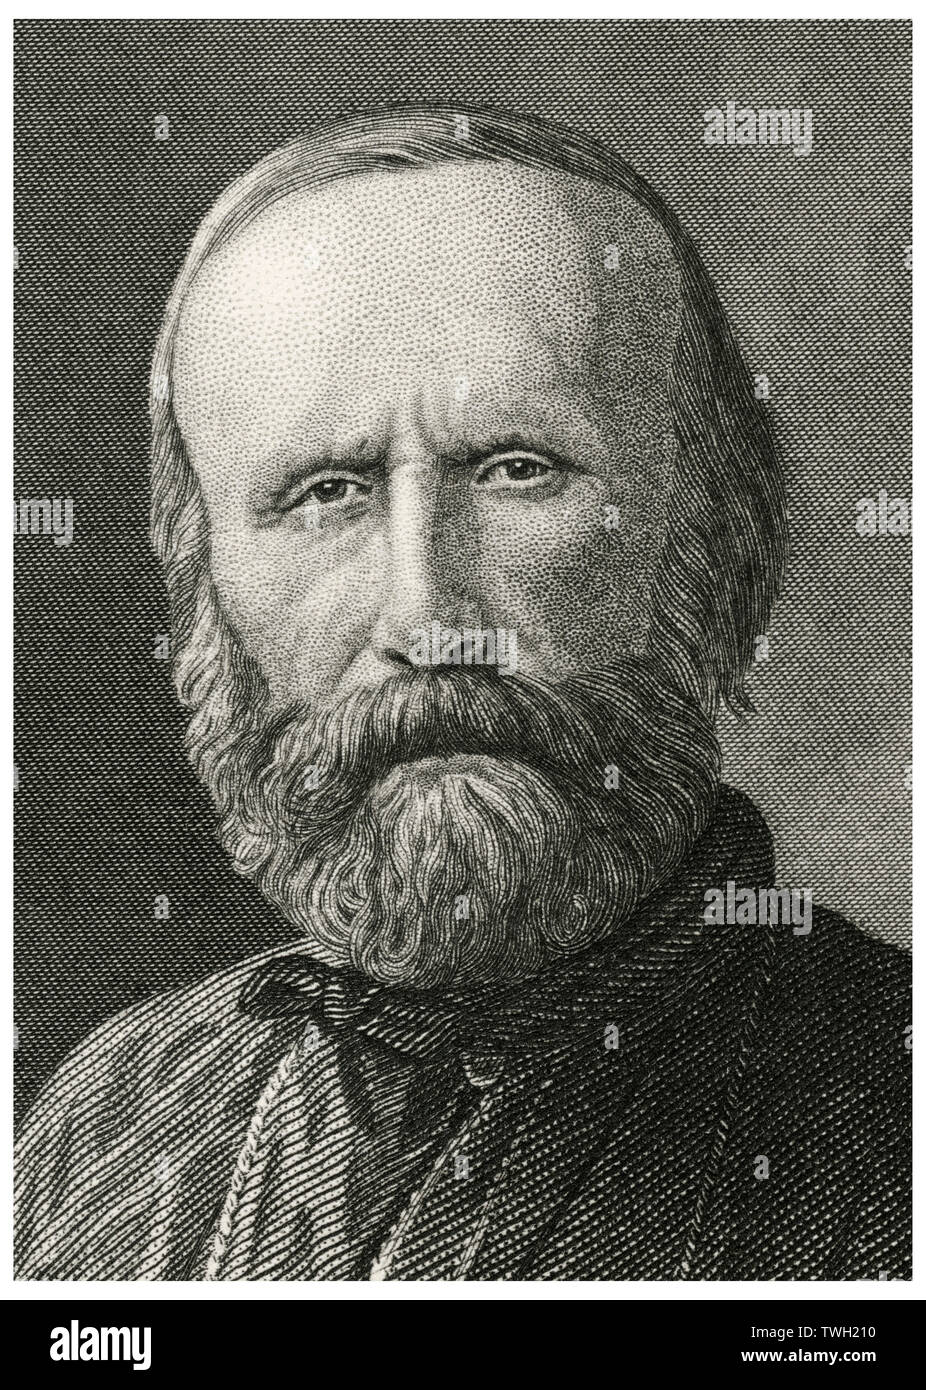 Giuseppe Garibaldi (1807-82), Italian General, Contributed to the Achievement of Italian Unification, Head and Shoulders Portrait, Steel Engraving, Portrait Gallery of Eminent Men and Women of Europe and America by Evert A. Duyckinck, Published by Henry J. Johnson, Johnson, Wilson & Company, New York, 1873 Stock Photo